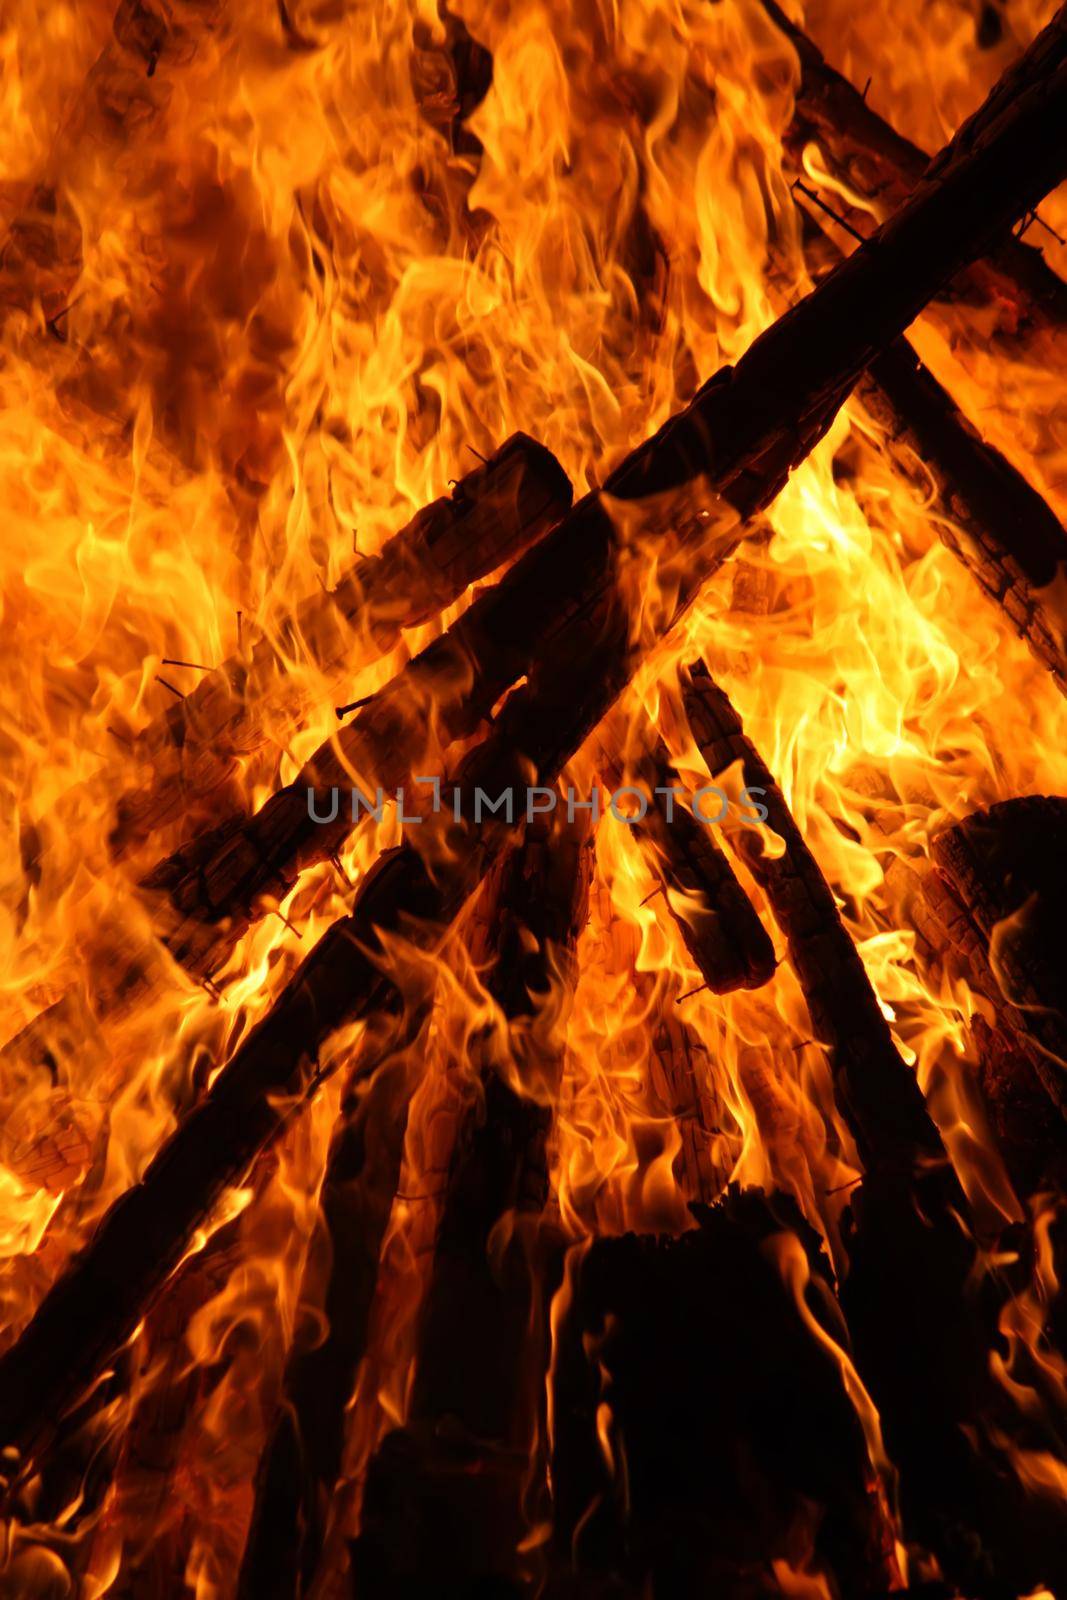 Bright bonfire flame outdoors. Firewood and wooden sticks burning in fire.